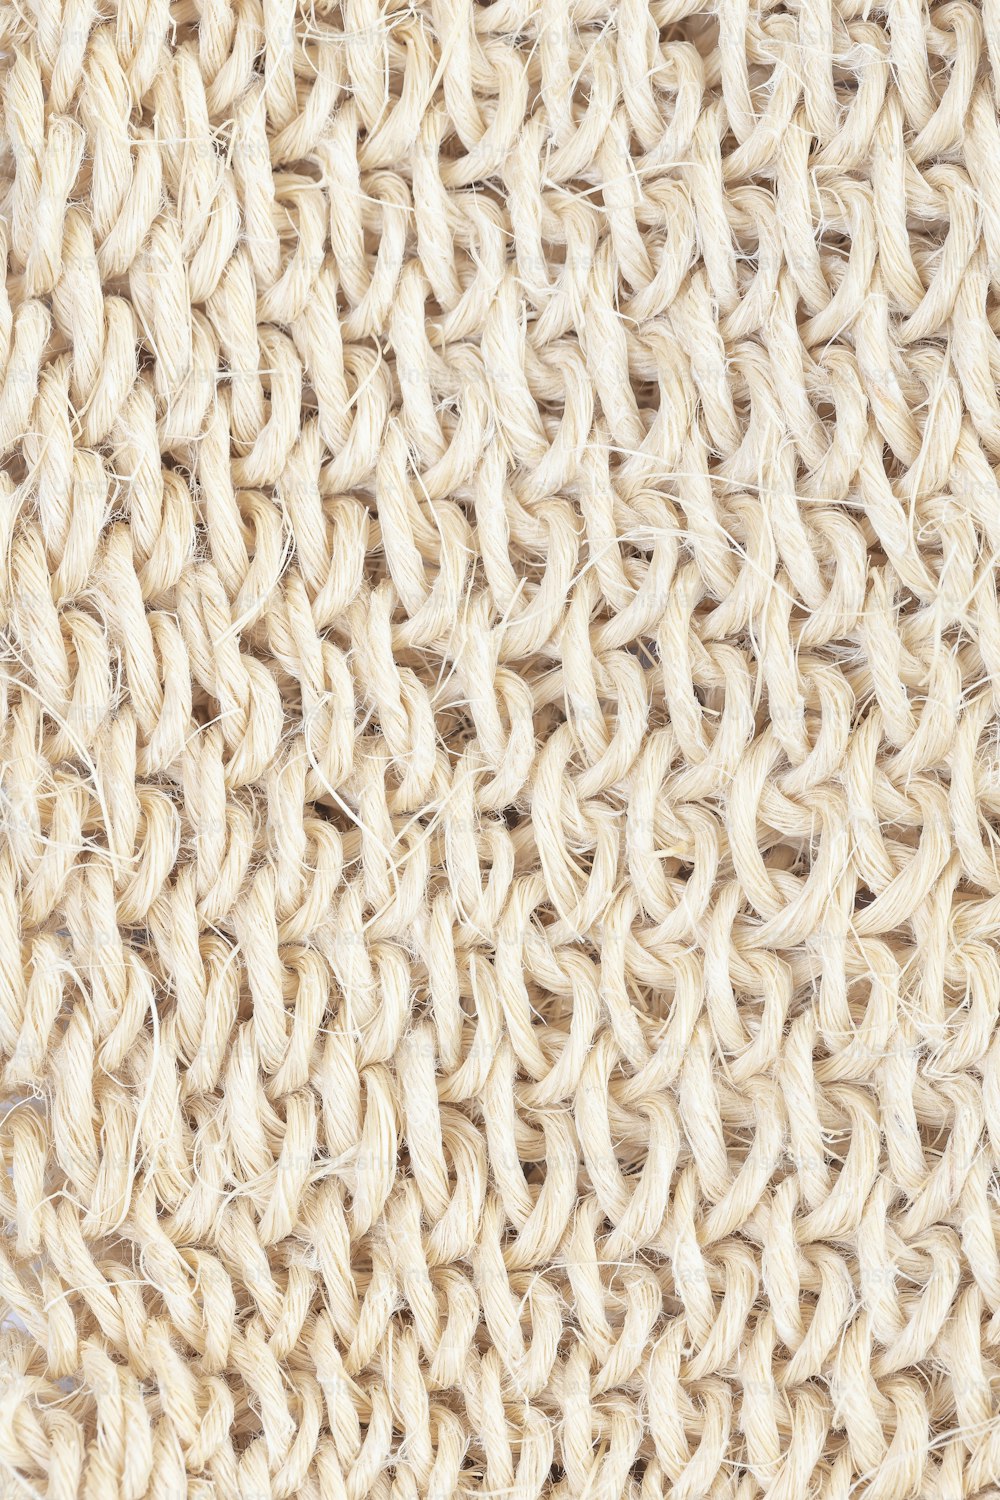 Knitted White Cotton Seamless Background Or Texture Stock Photo